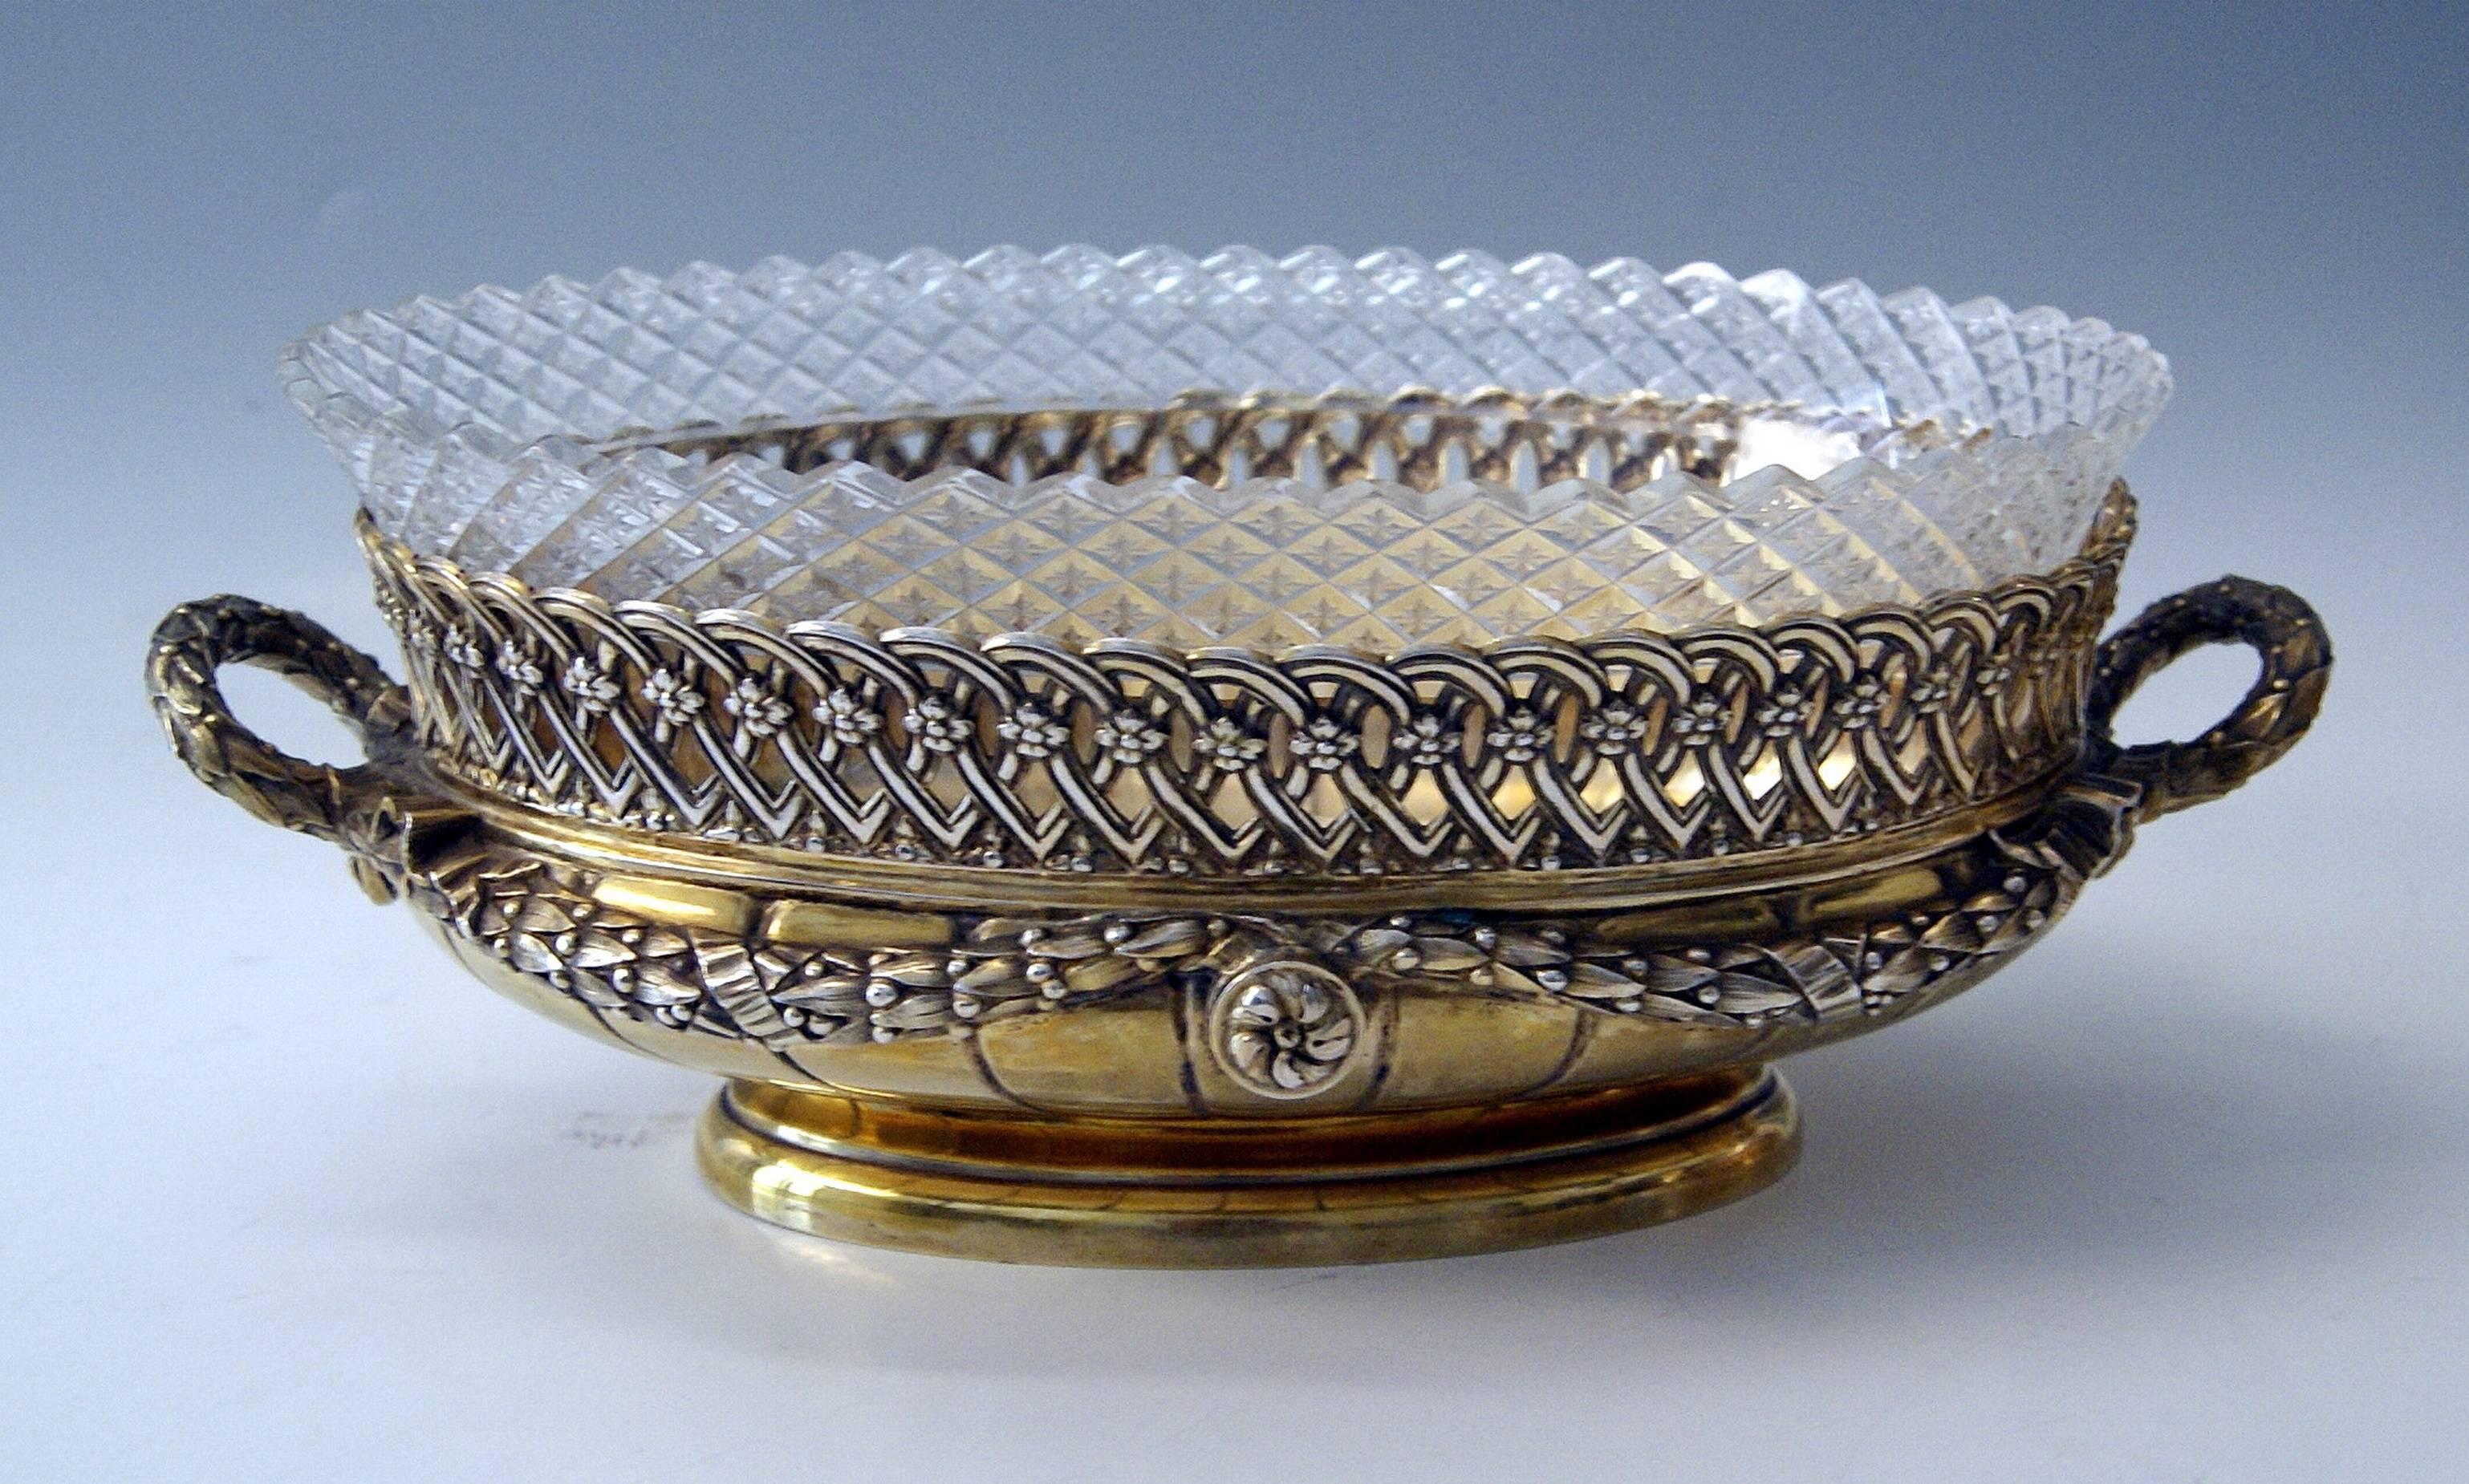 Silver German nicest pair of flower bowls / centerpieces with original elegant glass liners.
Transition period / Historicism - Art Nouveau (made circa 1880-1900).

Silver 800
branded by German Crescent with Crown.
Manufactory:
Hallmarked by